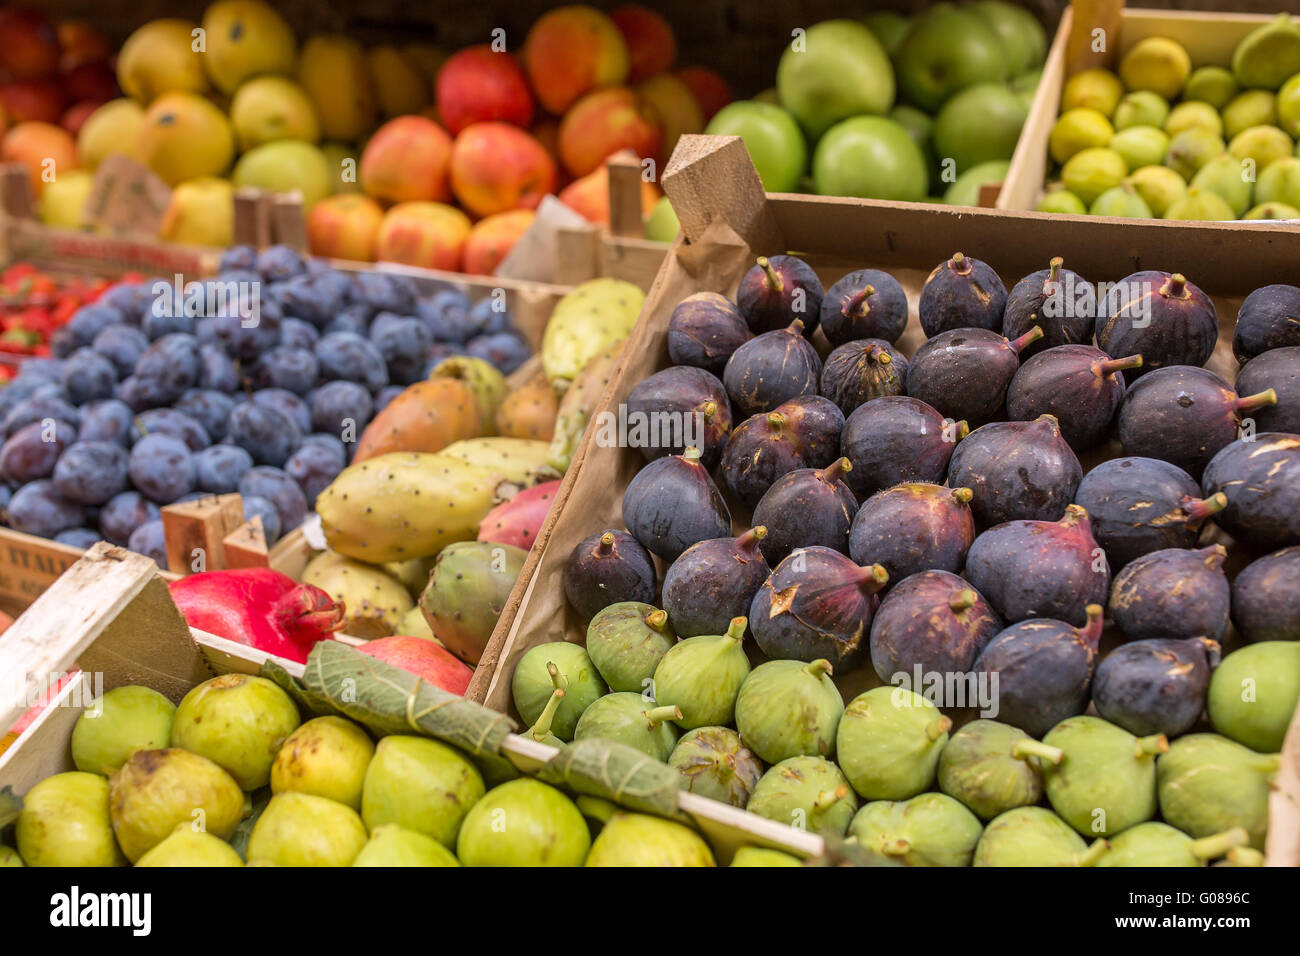 Fruits in boxes for sale in Italian market Stock Photo